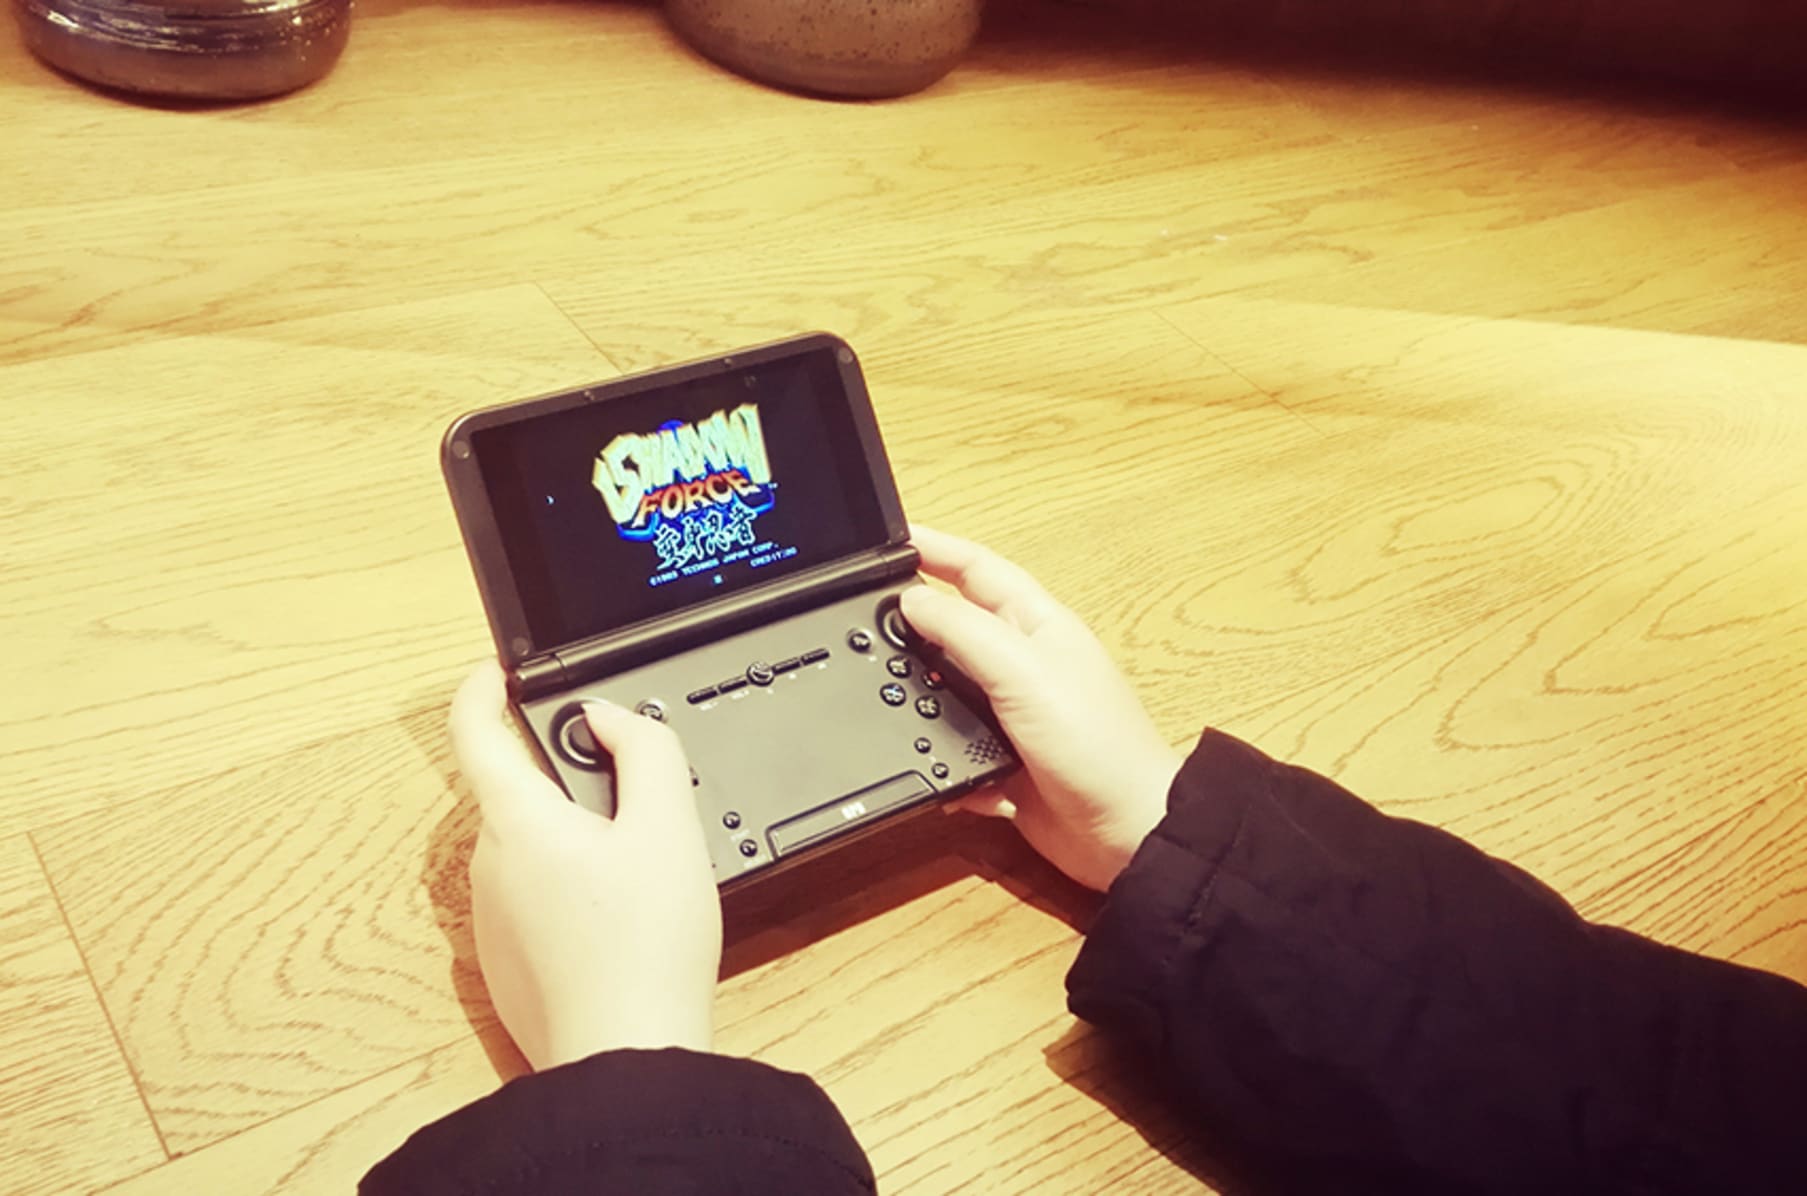 GPD XD Plus 5 Inch 6 core Handheld Game Console | Indiegogo